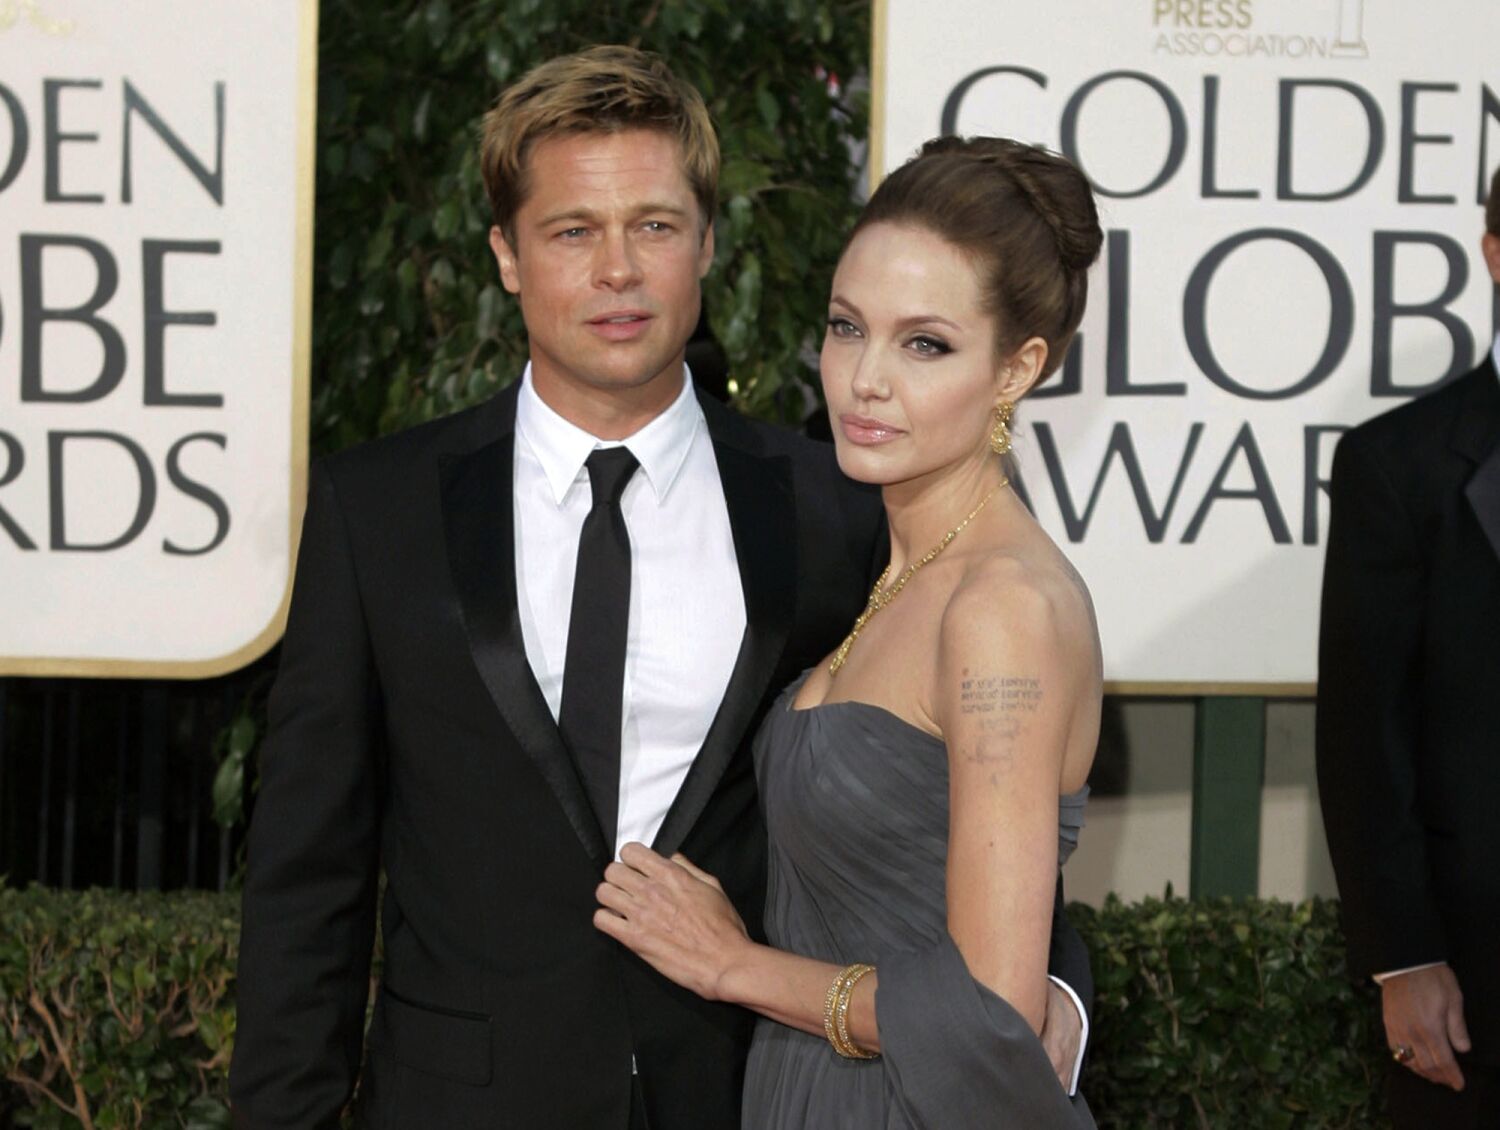 Brad Pitt goes off on Angelina Jolie's 'vindictive' winery sale. And she fires back